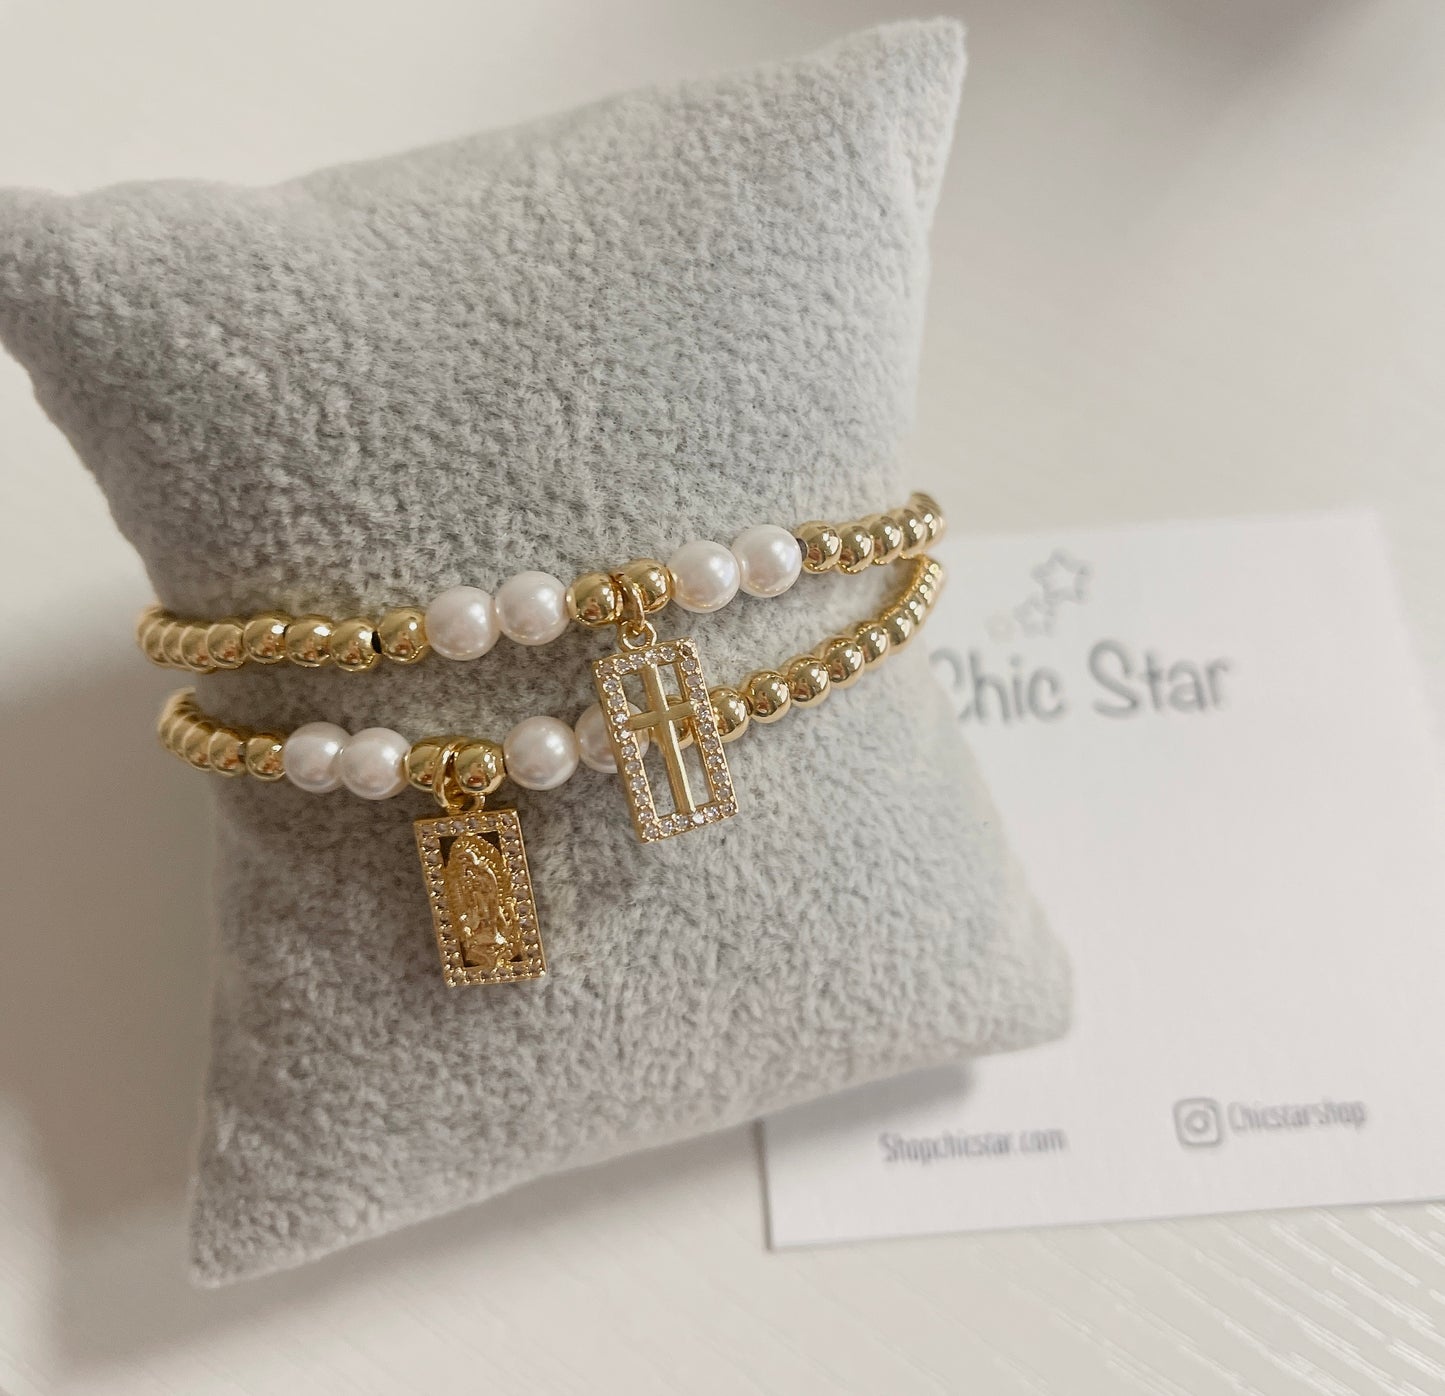 Bead and Pearl Bracelet